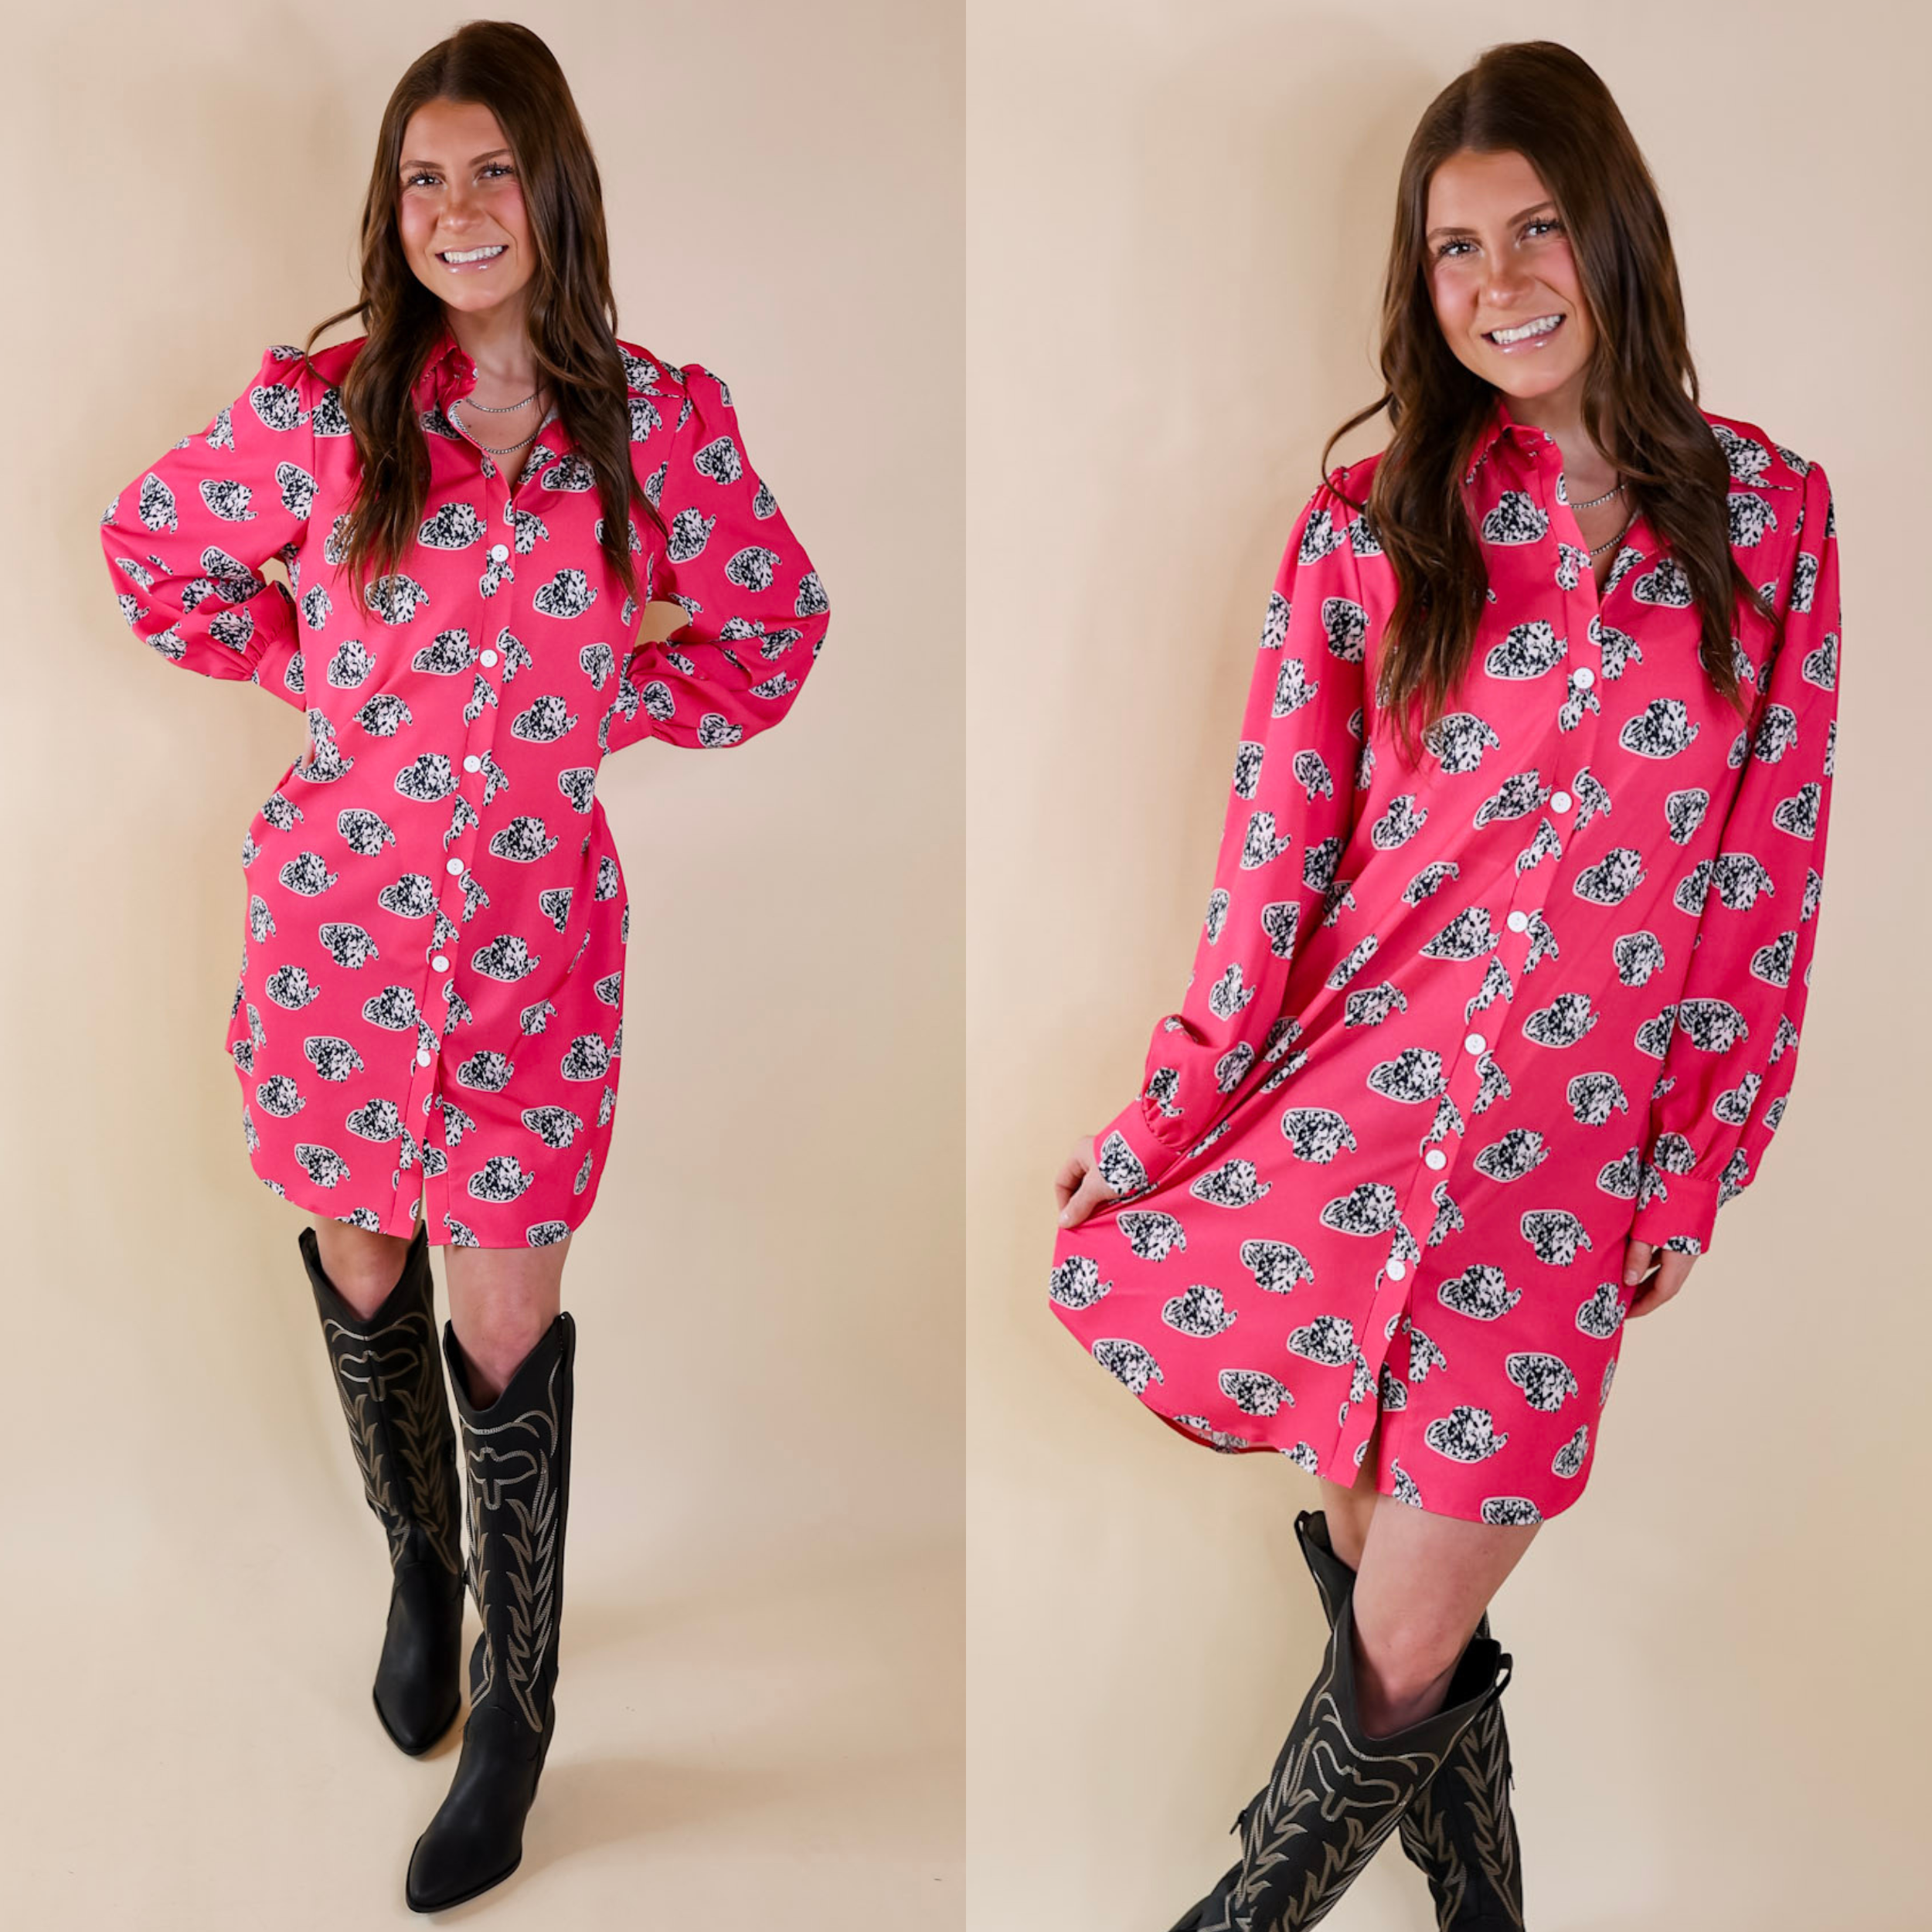 Model is wearing a pink long sleeve button up dress with cow print cowboy hats all over. Model has this knee length dress paired with black boots and silver jewelry.